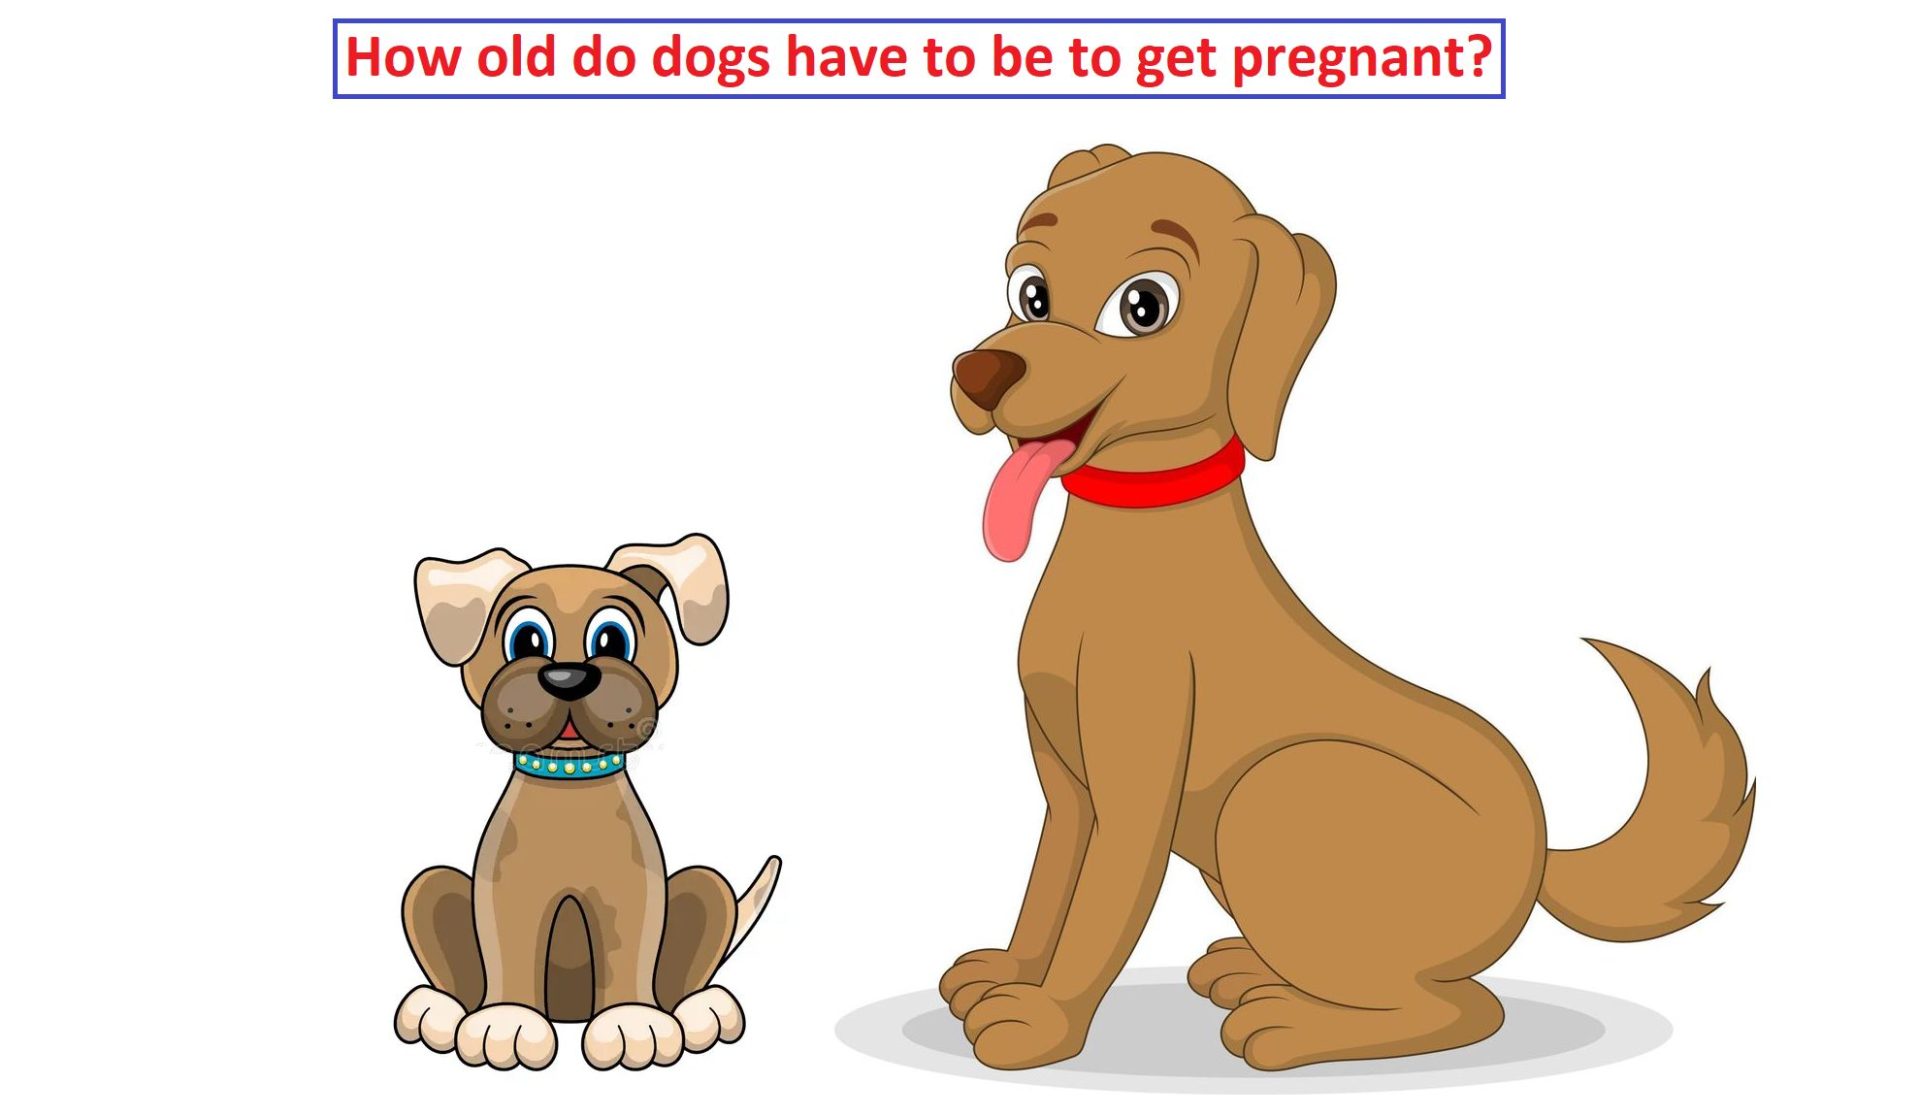 How old do dogs have to be to get pregnant?